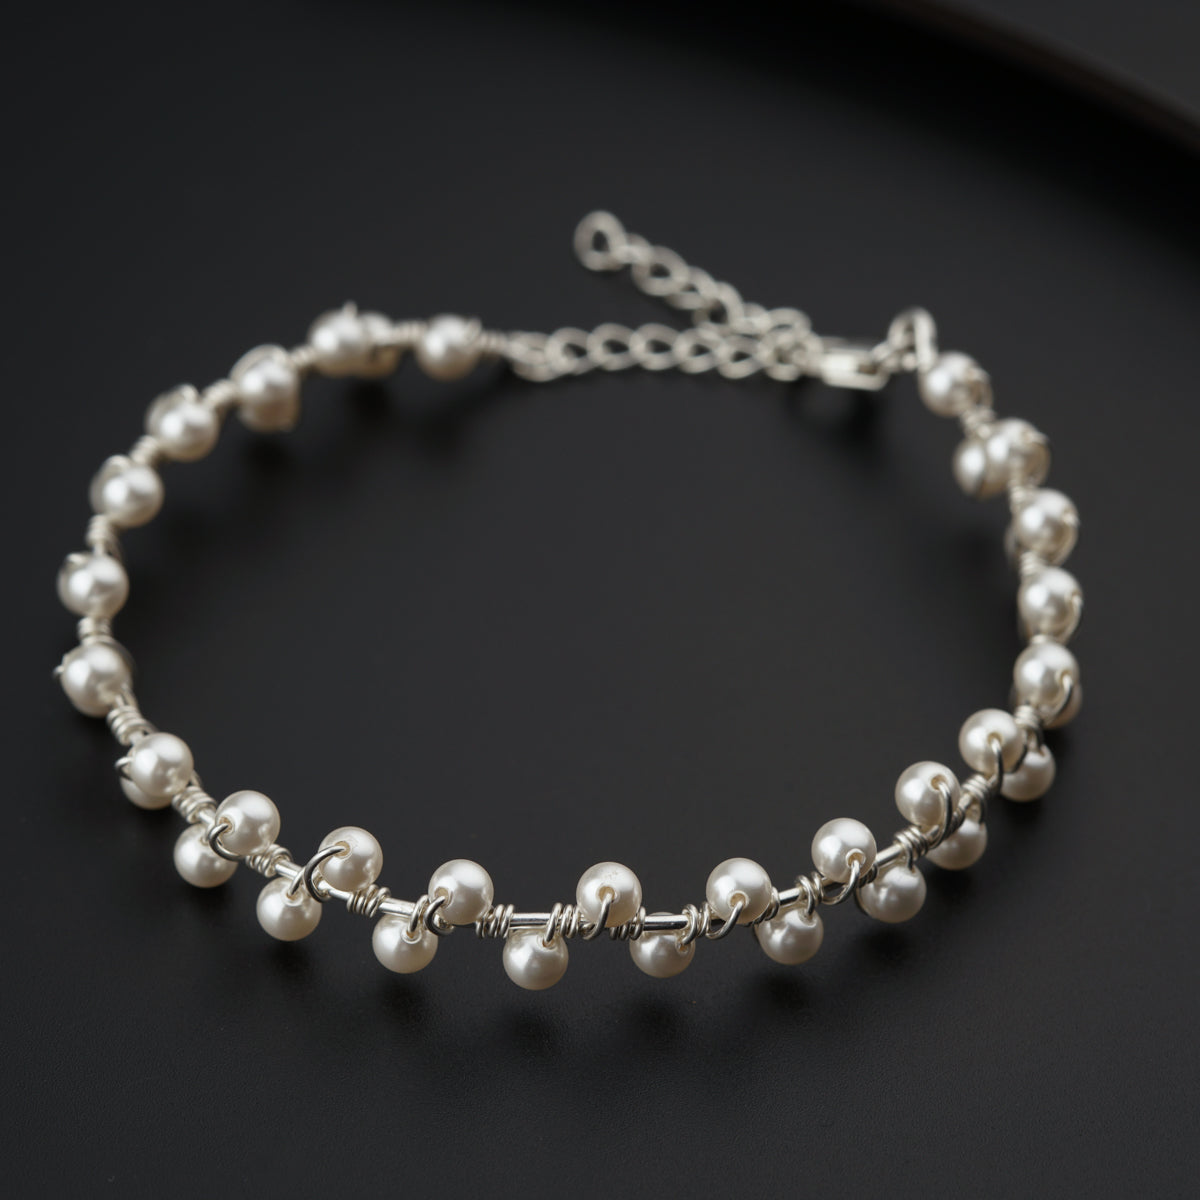 a silver bracelet with pearls on a black surface